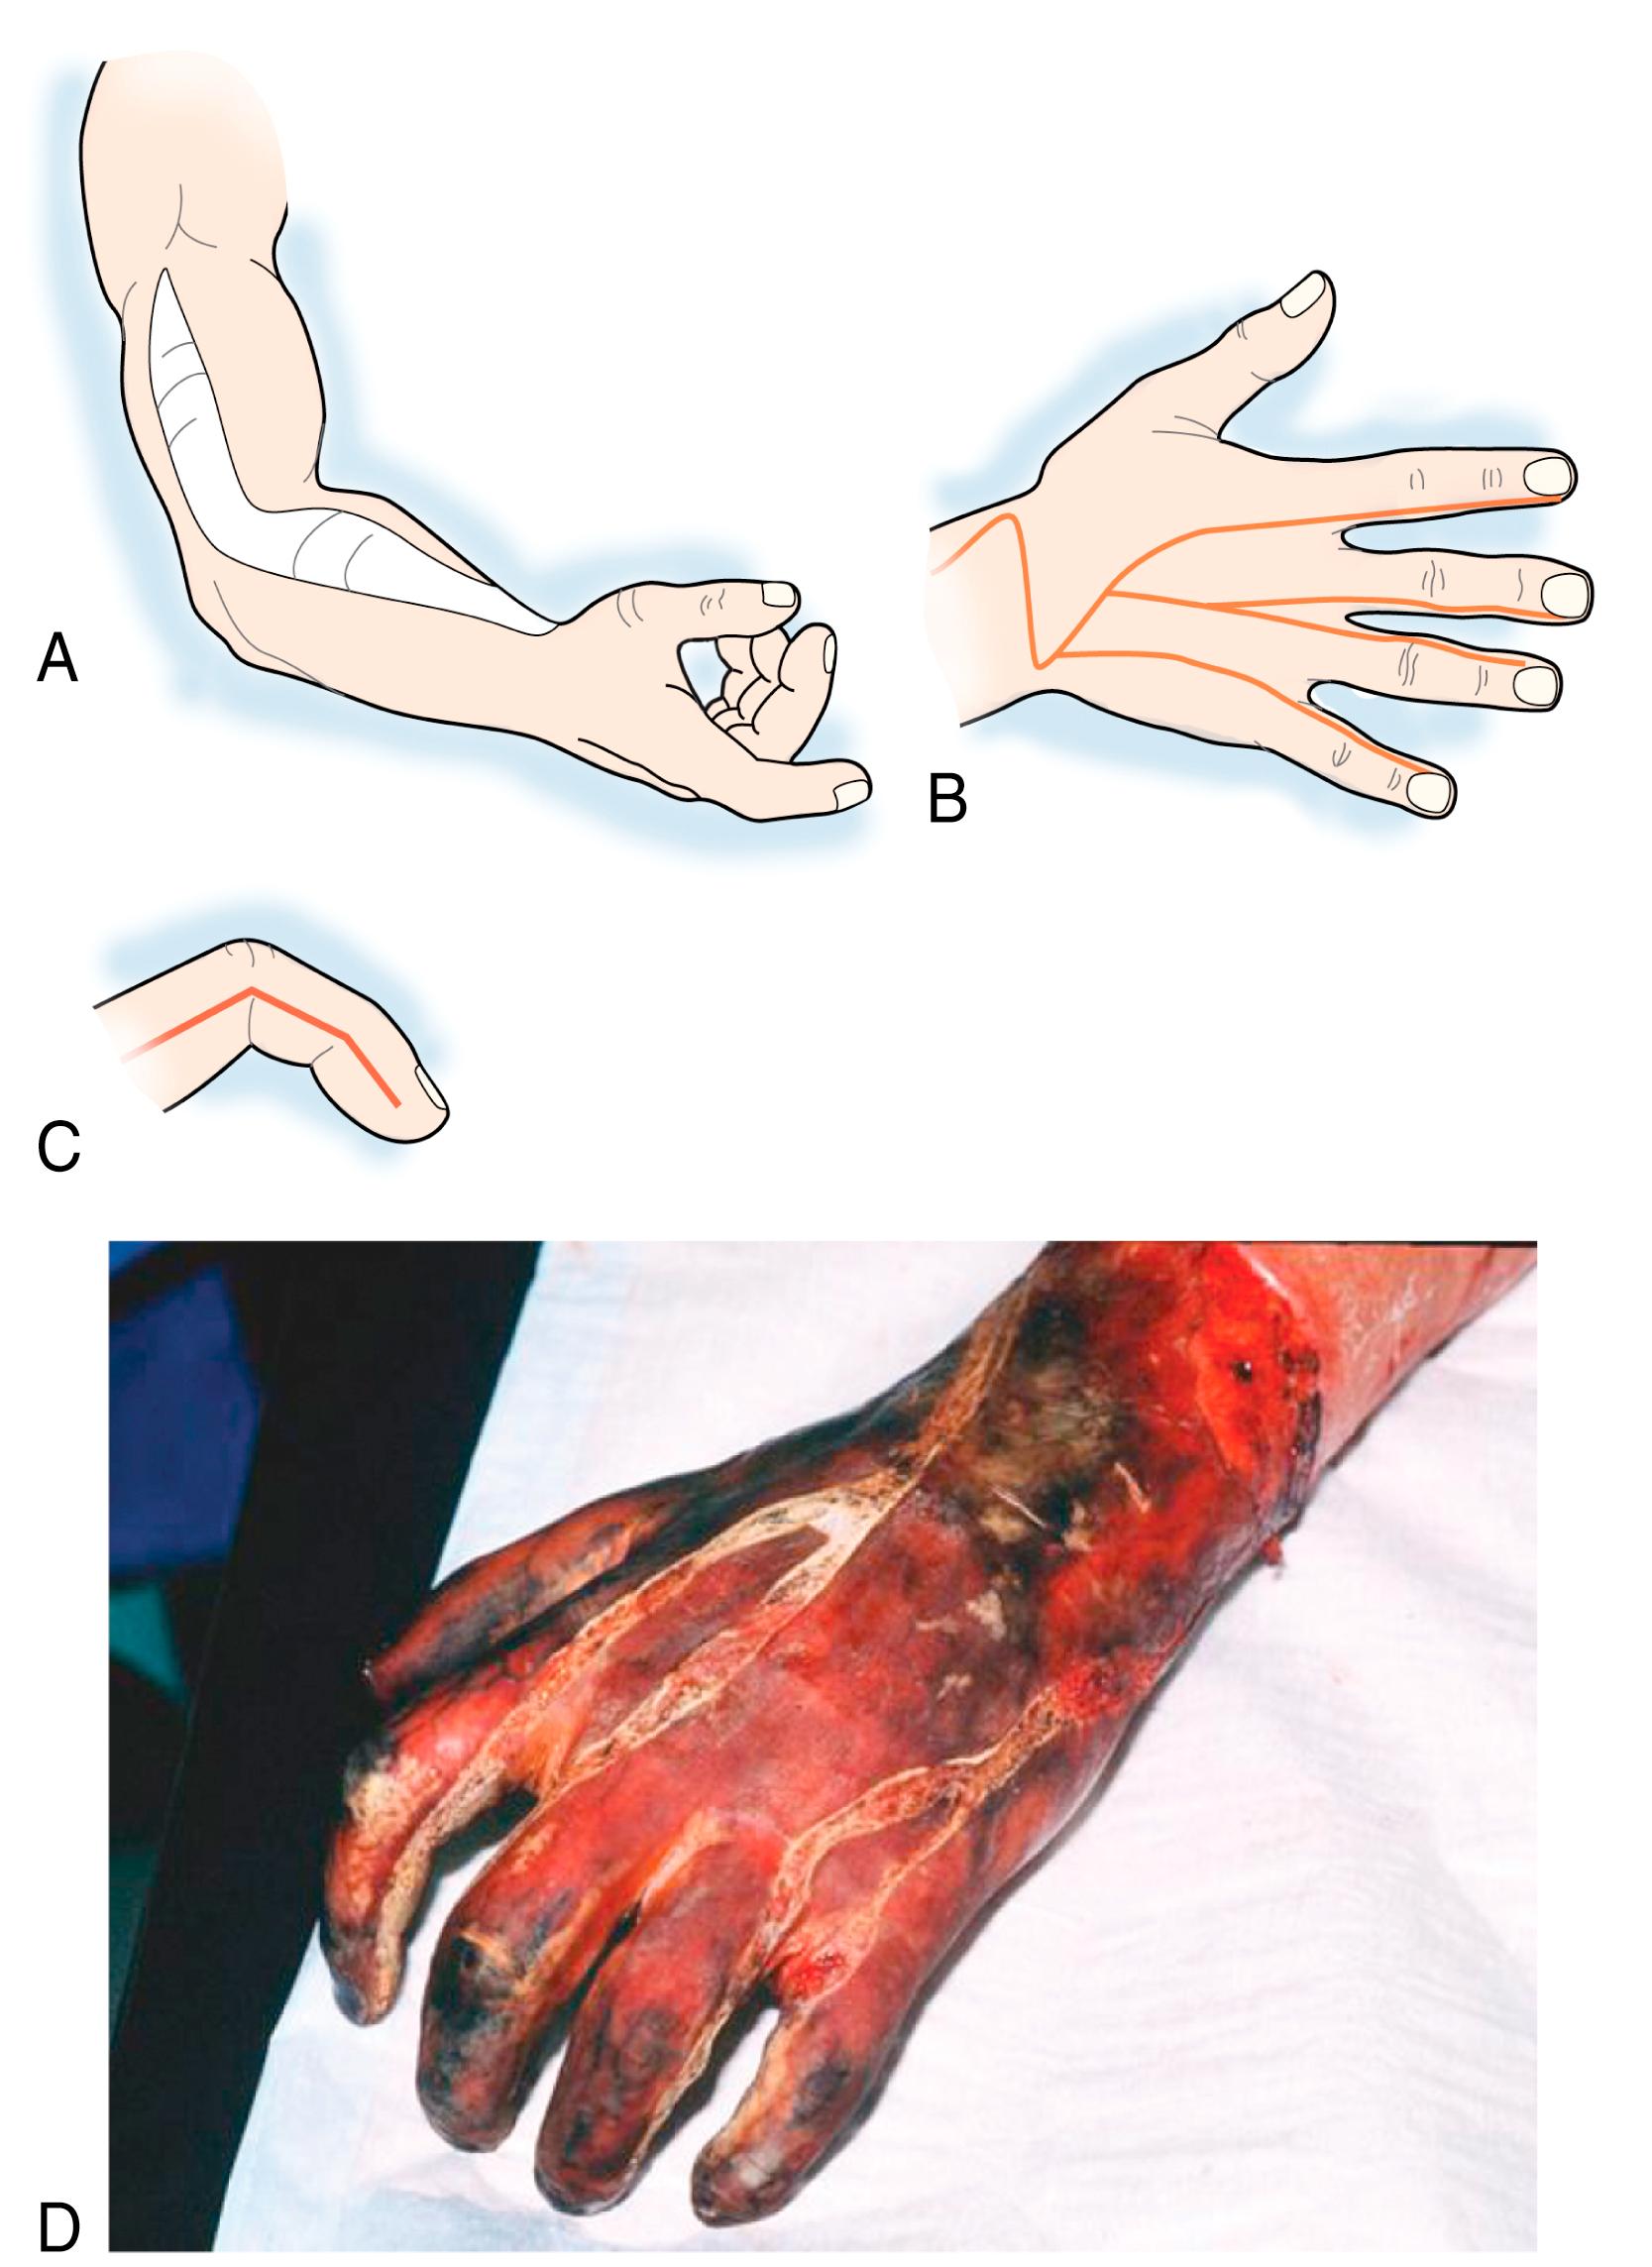 Fig. 57.6, A, Schematic illustration of escharotomy incisions in the upper extremity. B, Escharotomy incisions in the dorsum of the hand. C, Clinical situation after escharotomy of the dorsum of the hand. D, Escharotomy incisions in the digits, midlateral view.